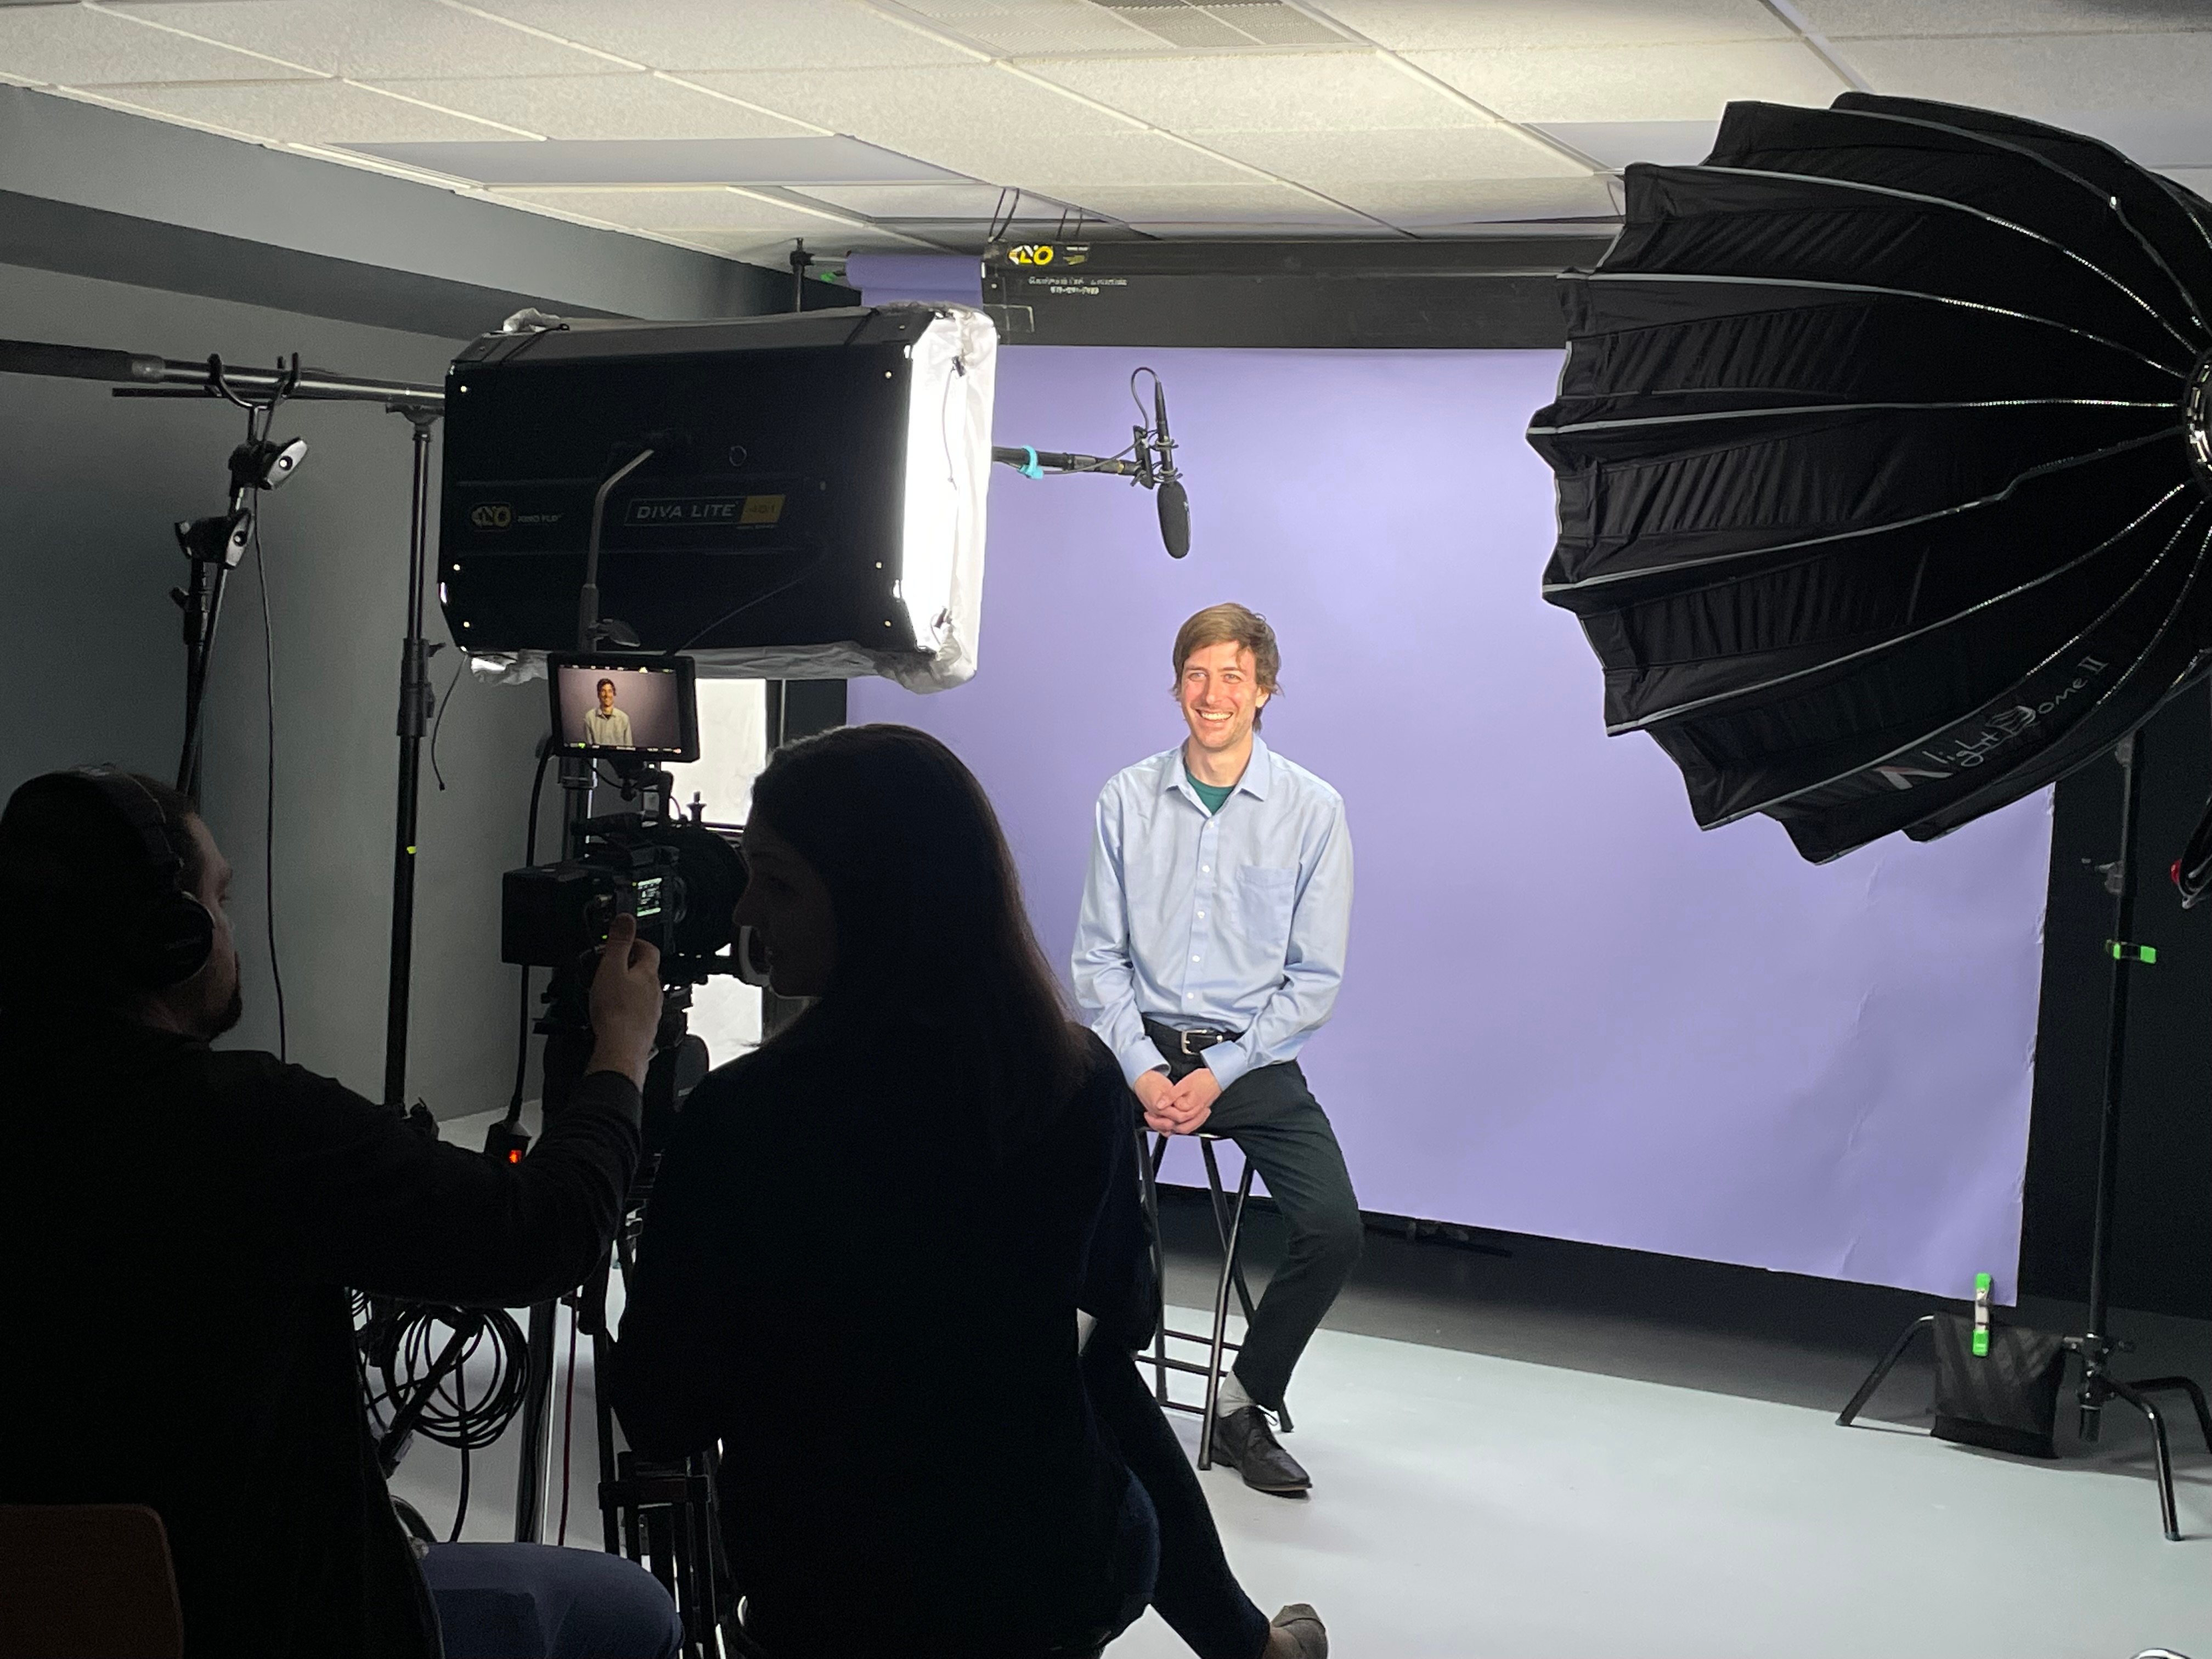 Erik Larsson sits in a video studio in front of a purple backdrop being interviewed. 